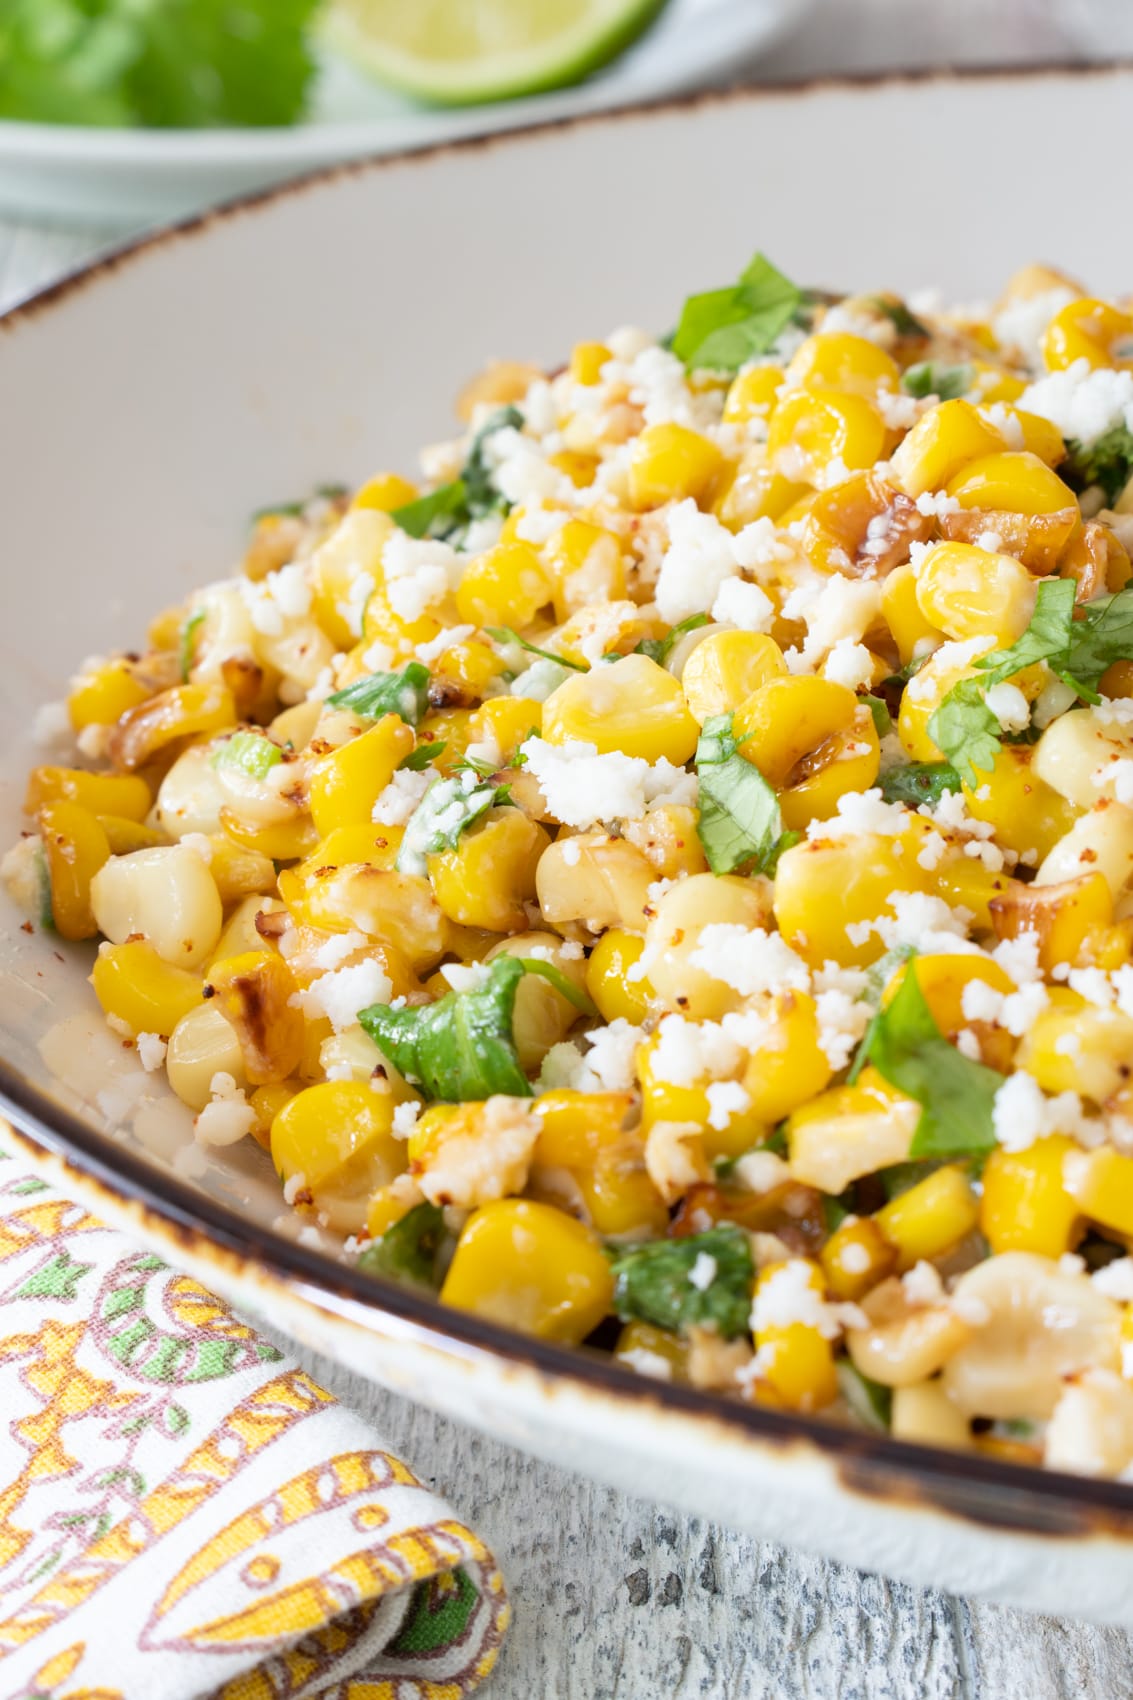 https://fortheloveofcooking-net.exactdn.com/wp-content/uploads/2022/06/Mexican-Street-Corn-Salad-3767.jpg?strip=all&lossy=1&quality=90&ssl=1